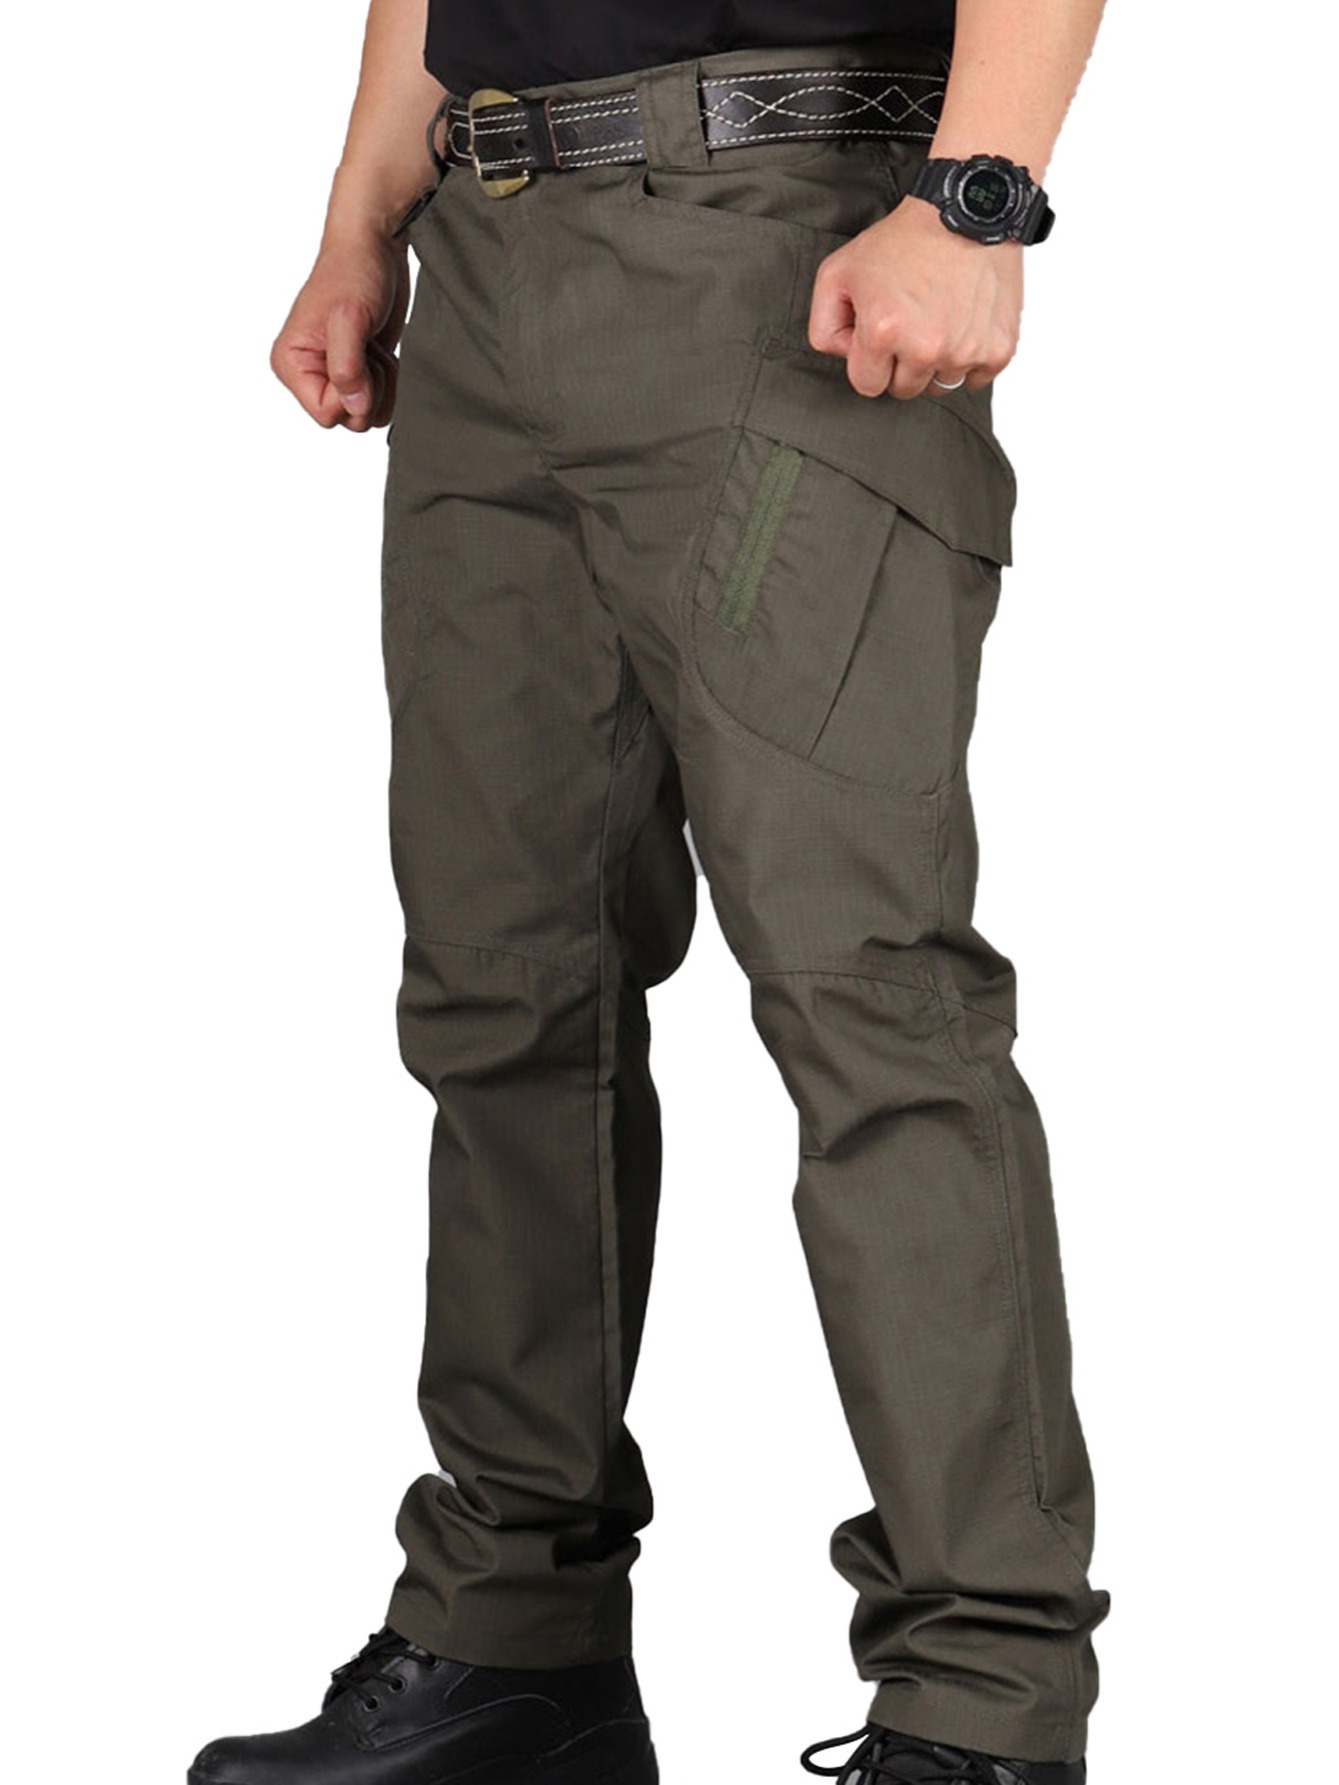 Zip Up Multi Pocket Solid Sports Pants, Sweatpants, Men's Non-Stretch Waterproof Lightweight Hiking Work Multi Pockets Cargo Pants With,Temu